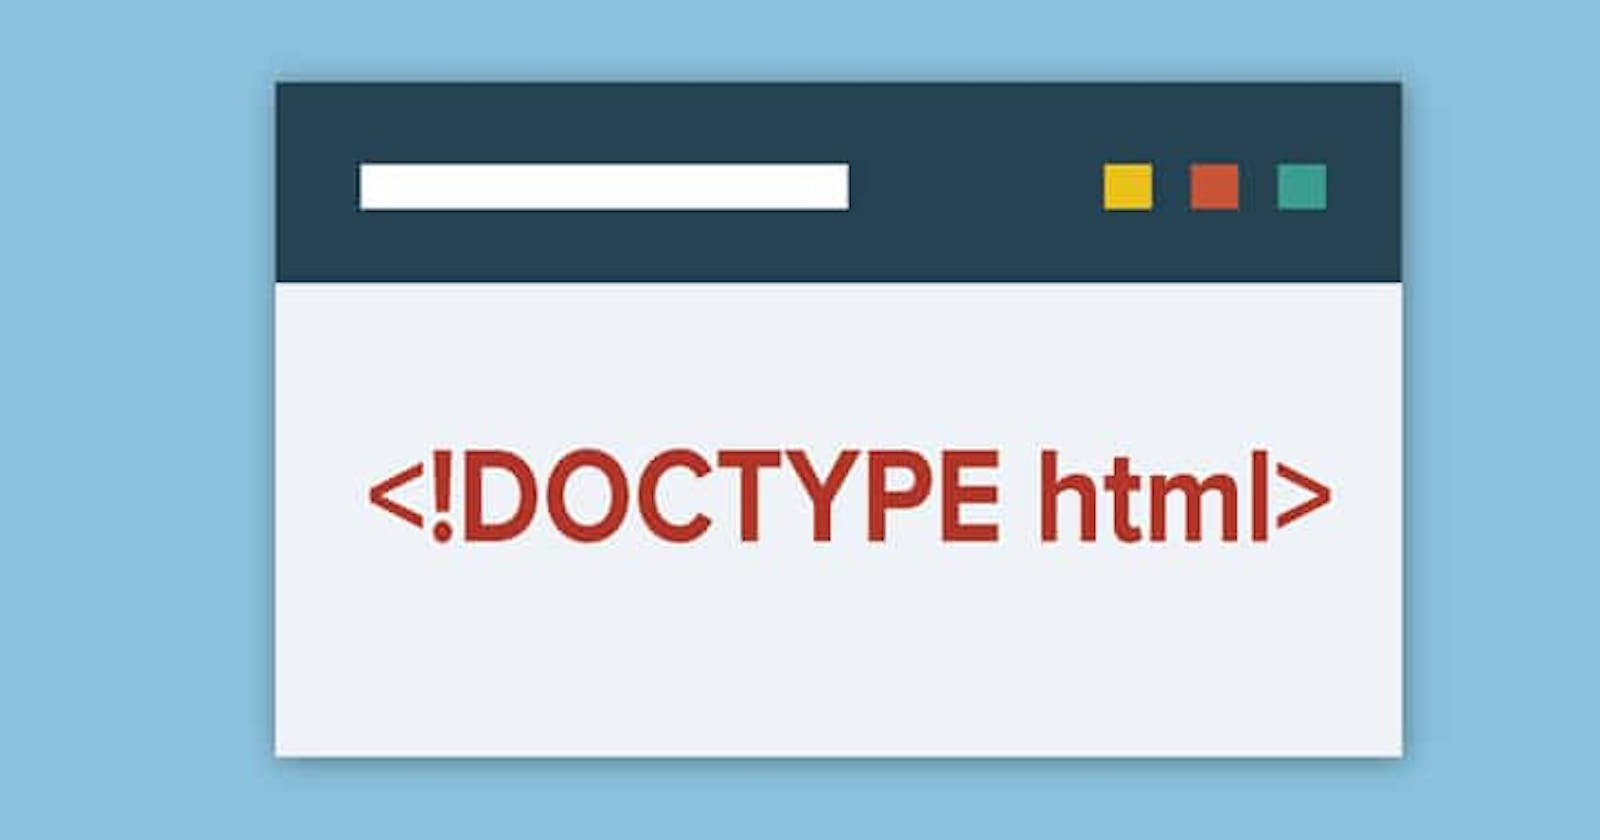 All You Need to Know of <!DOCTYPE html>